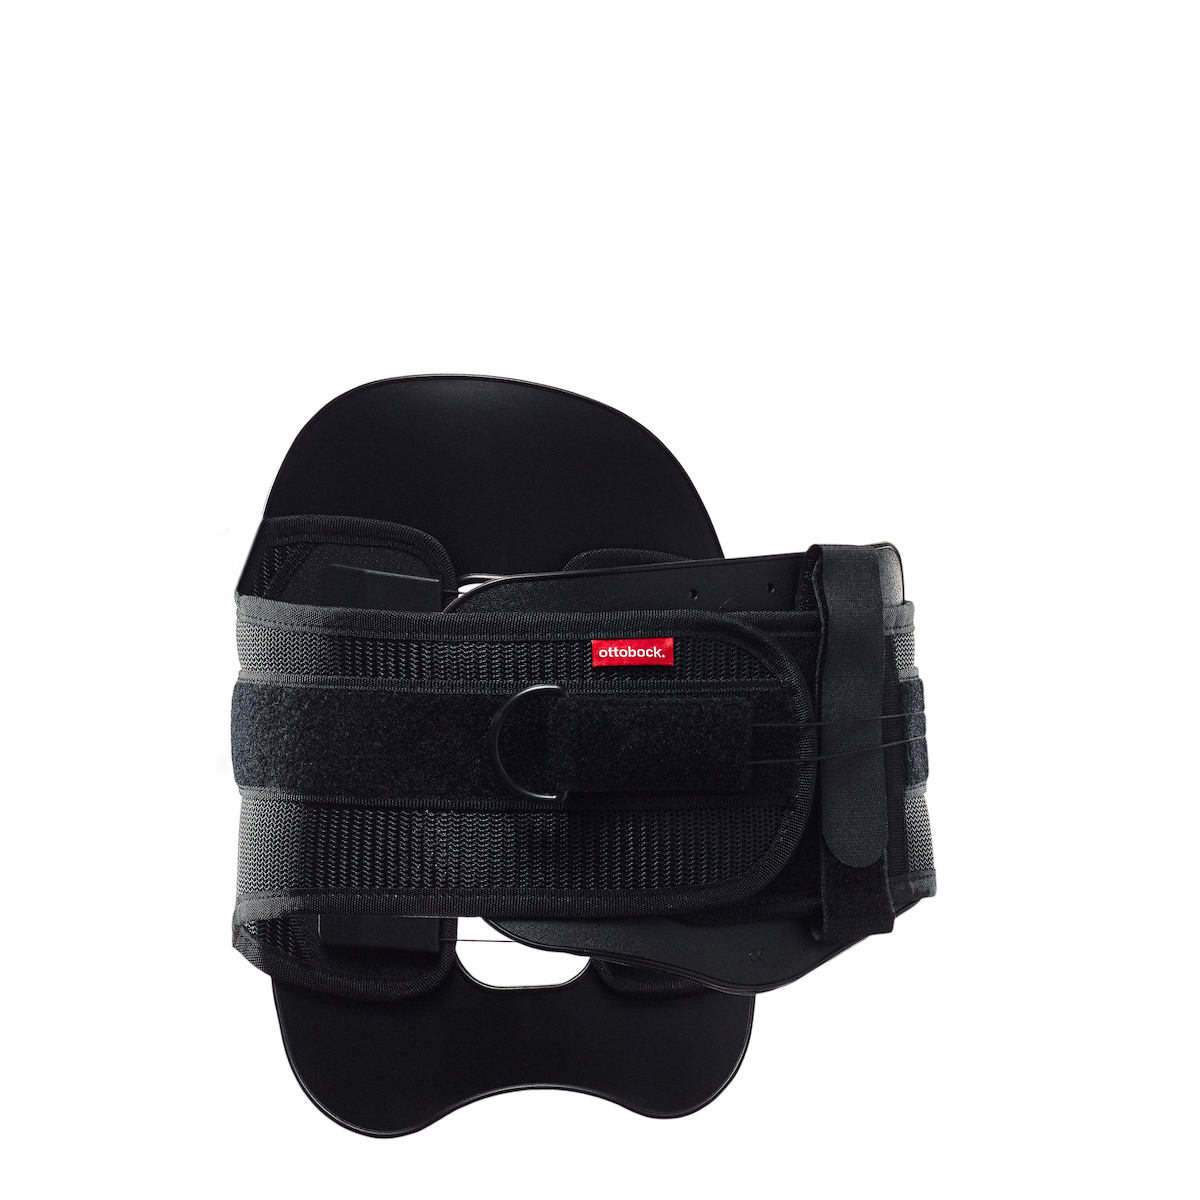 Spinogrip Spinal Brace - Dynamic Techno Medicals